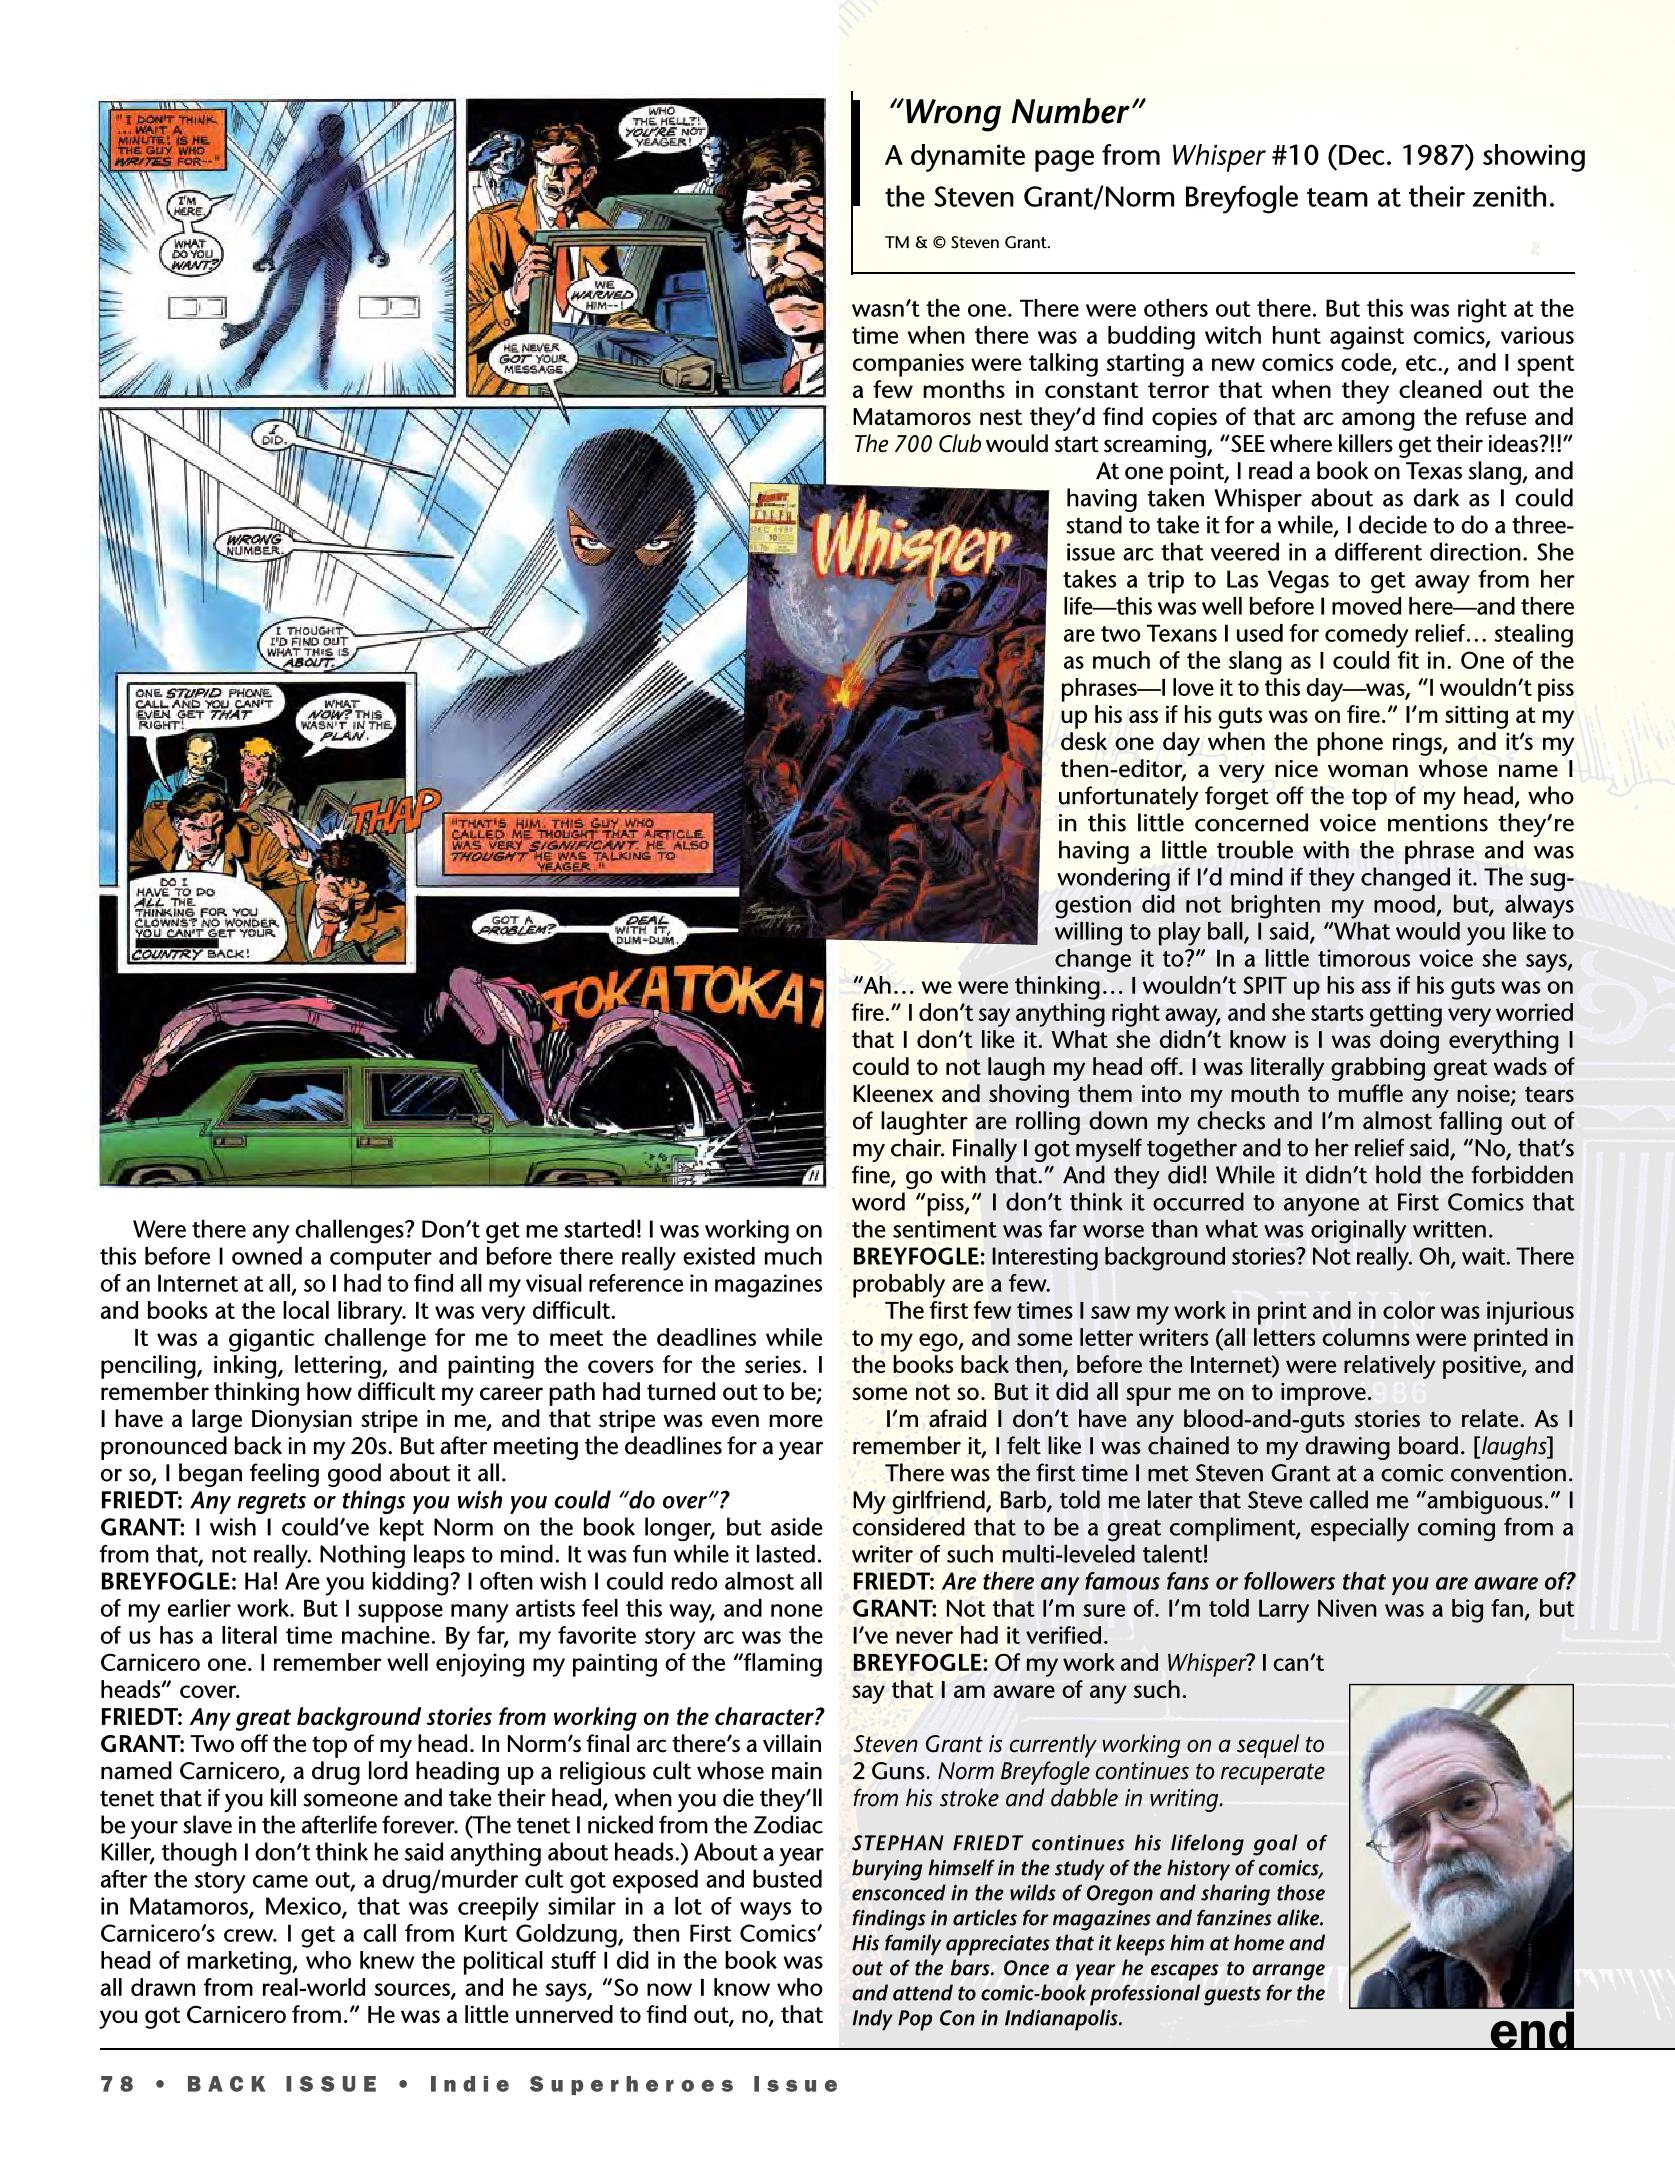 Read online Back Issue comic -  Issue #94 - 79